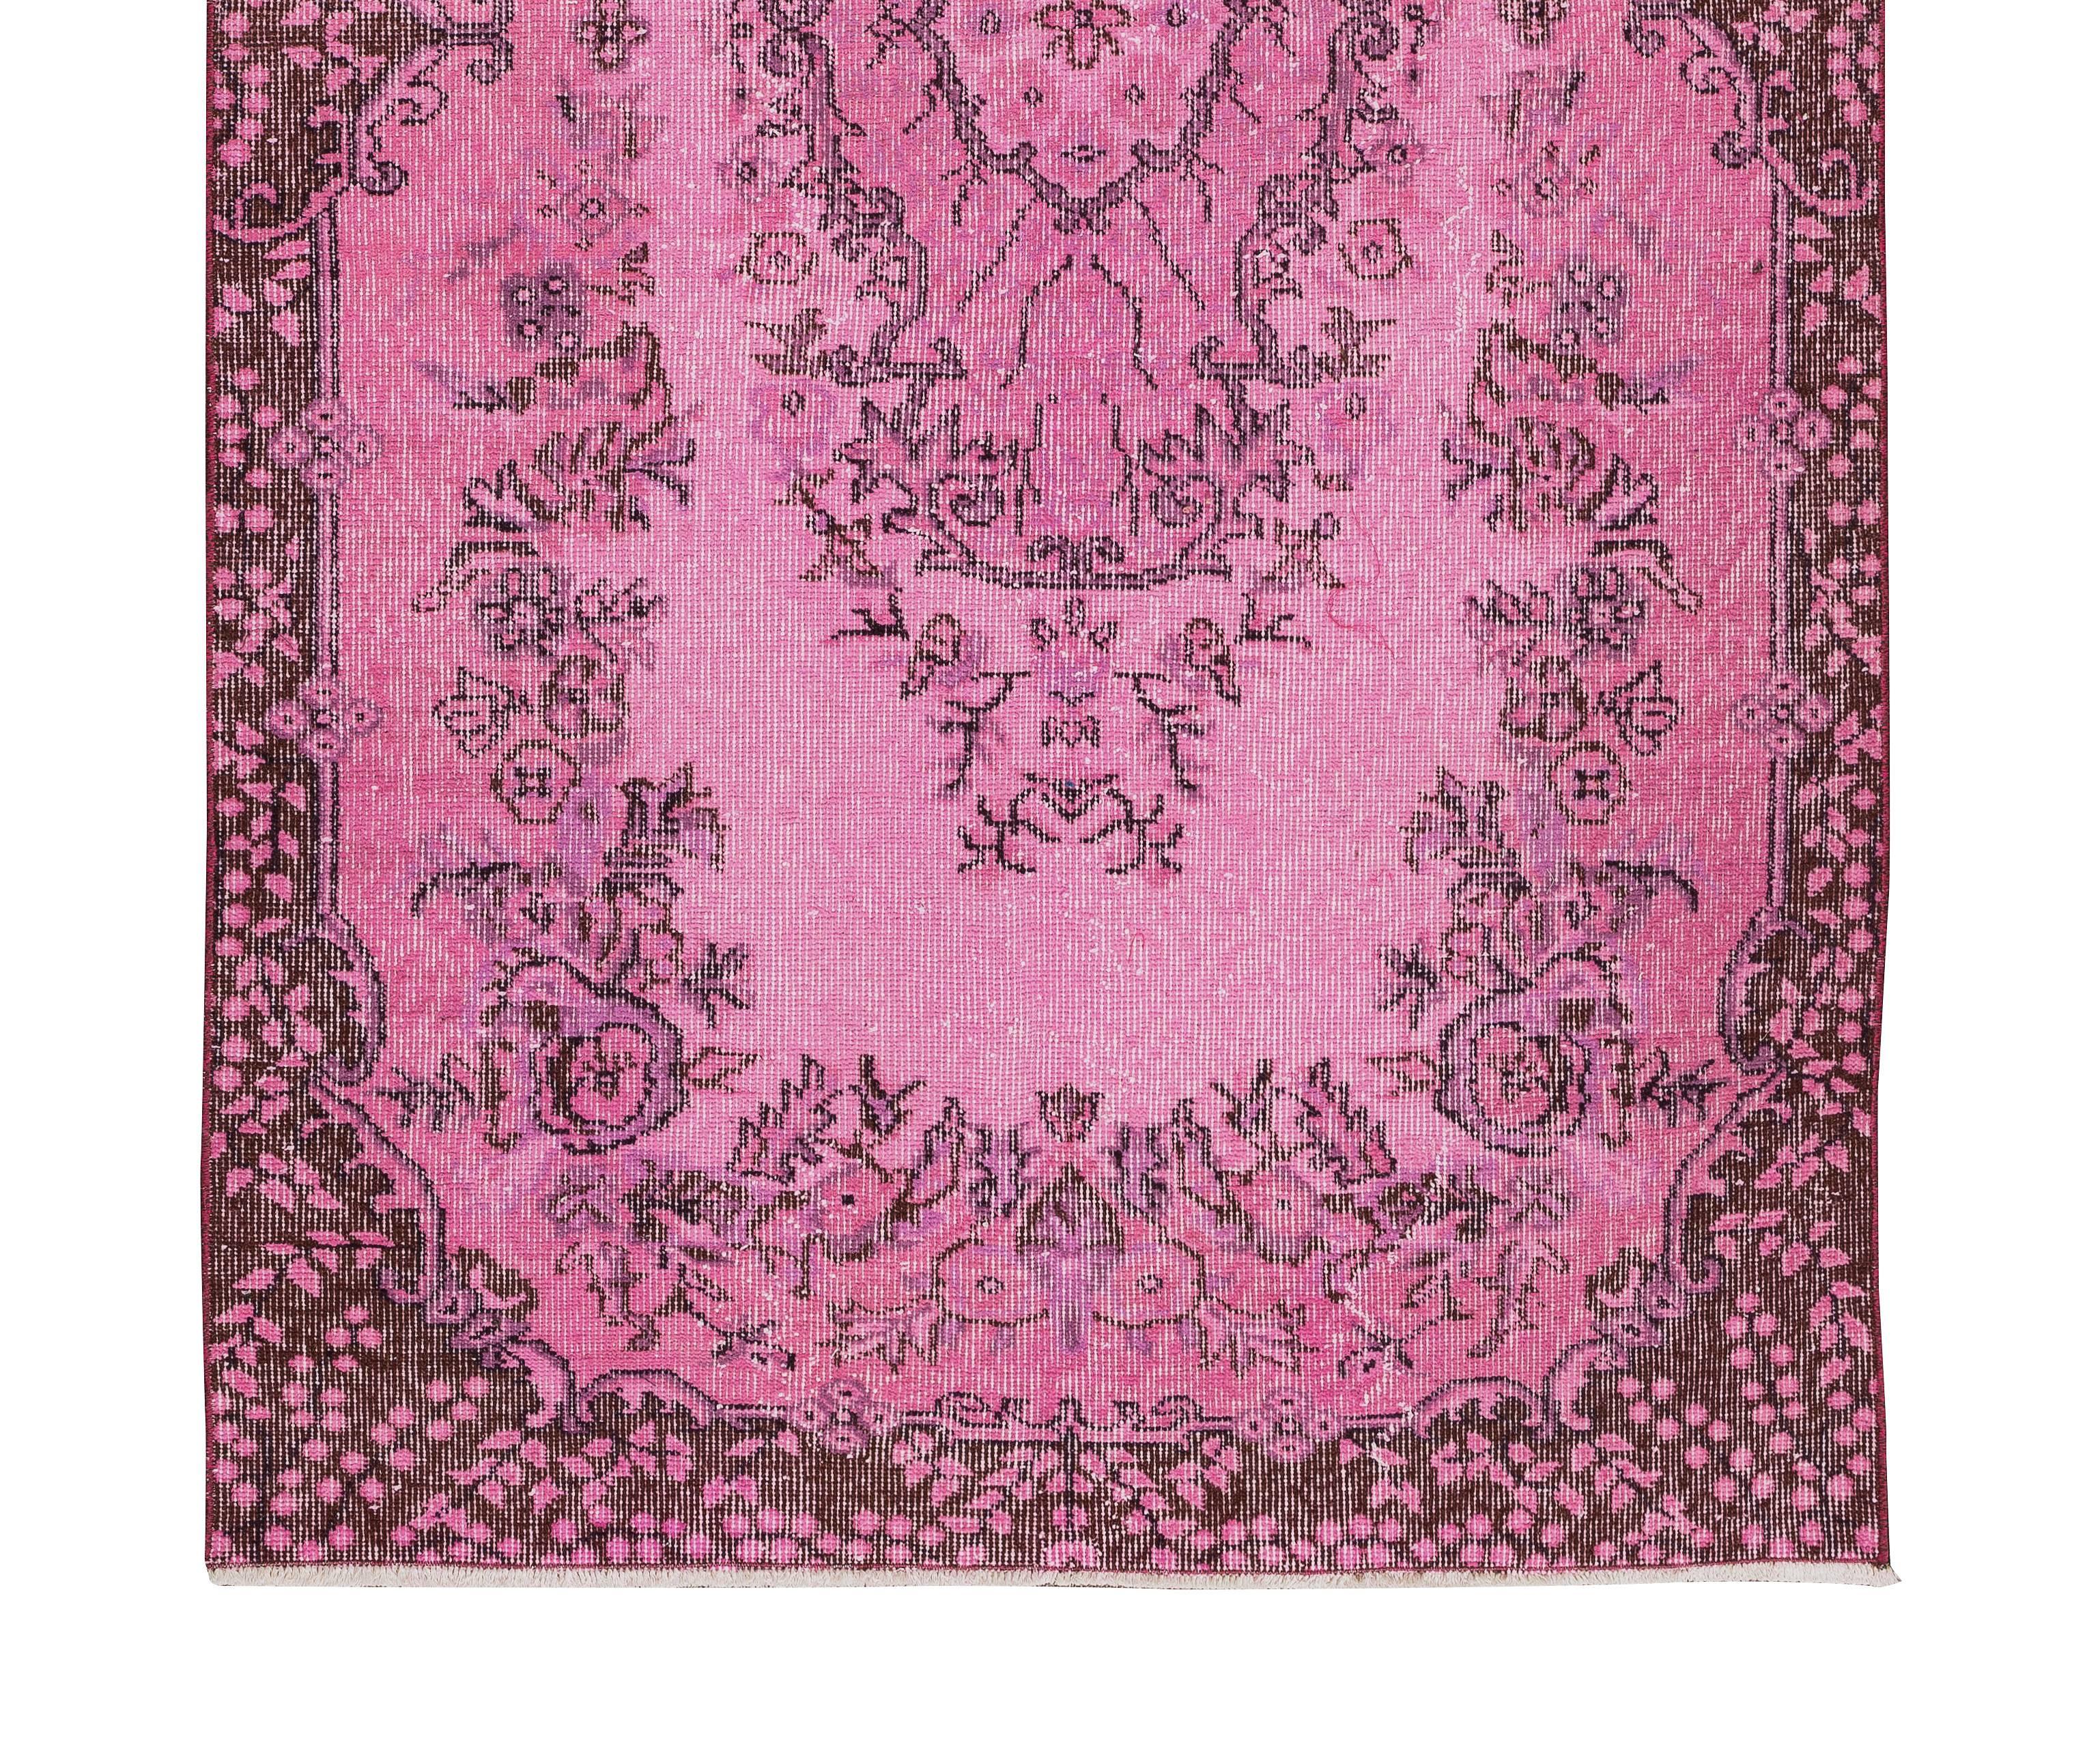 3.9x7.2 Ft Floral Medallion Design Vintage Handmade Turkish Rug Overdyed in Pink In Good Condition For Sale In Philadelphia, PA